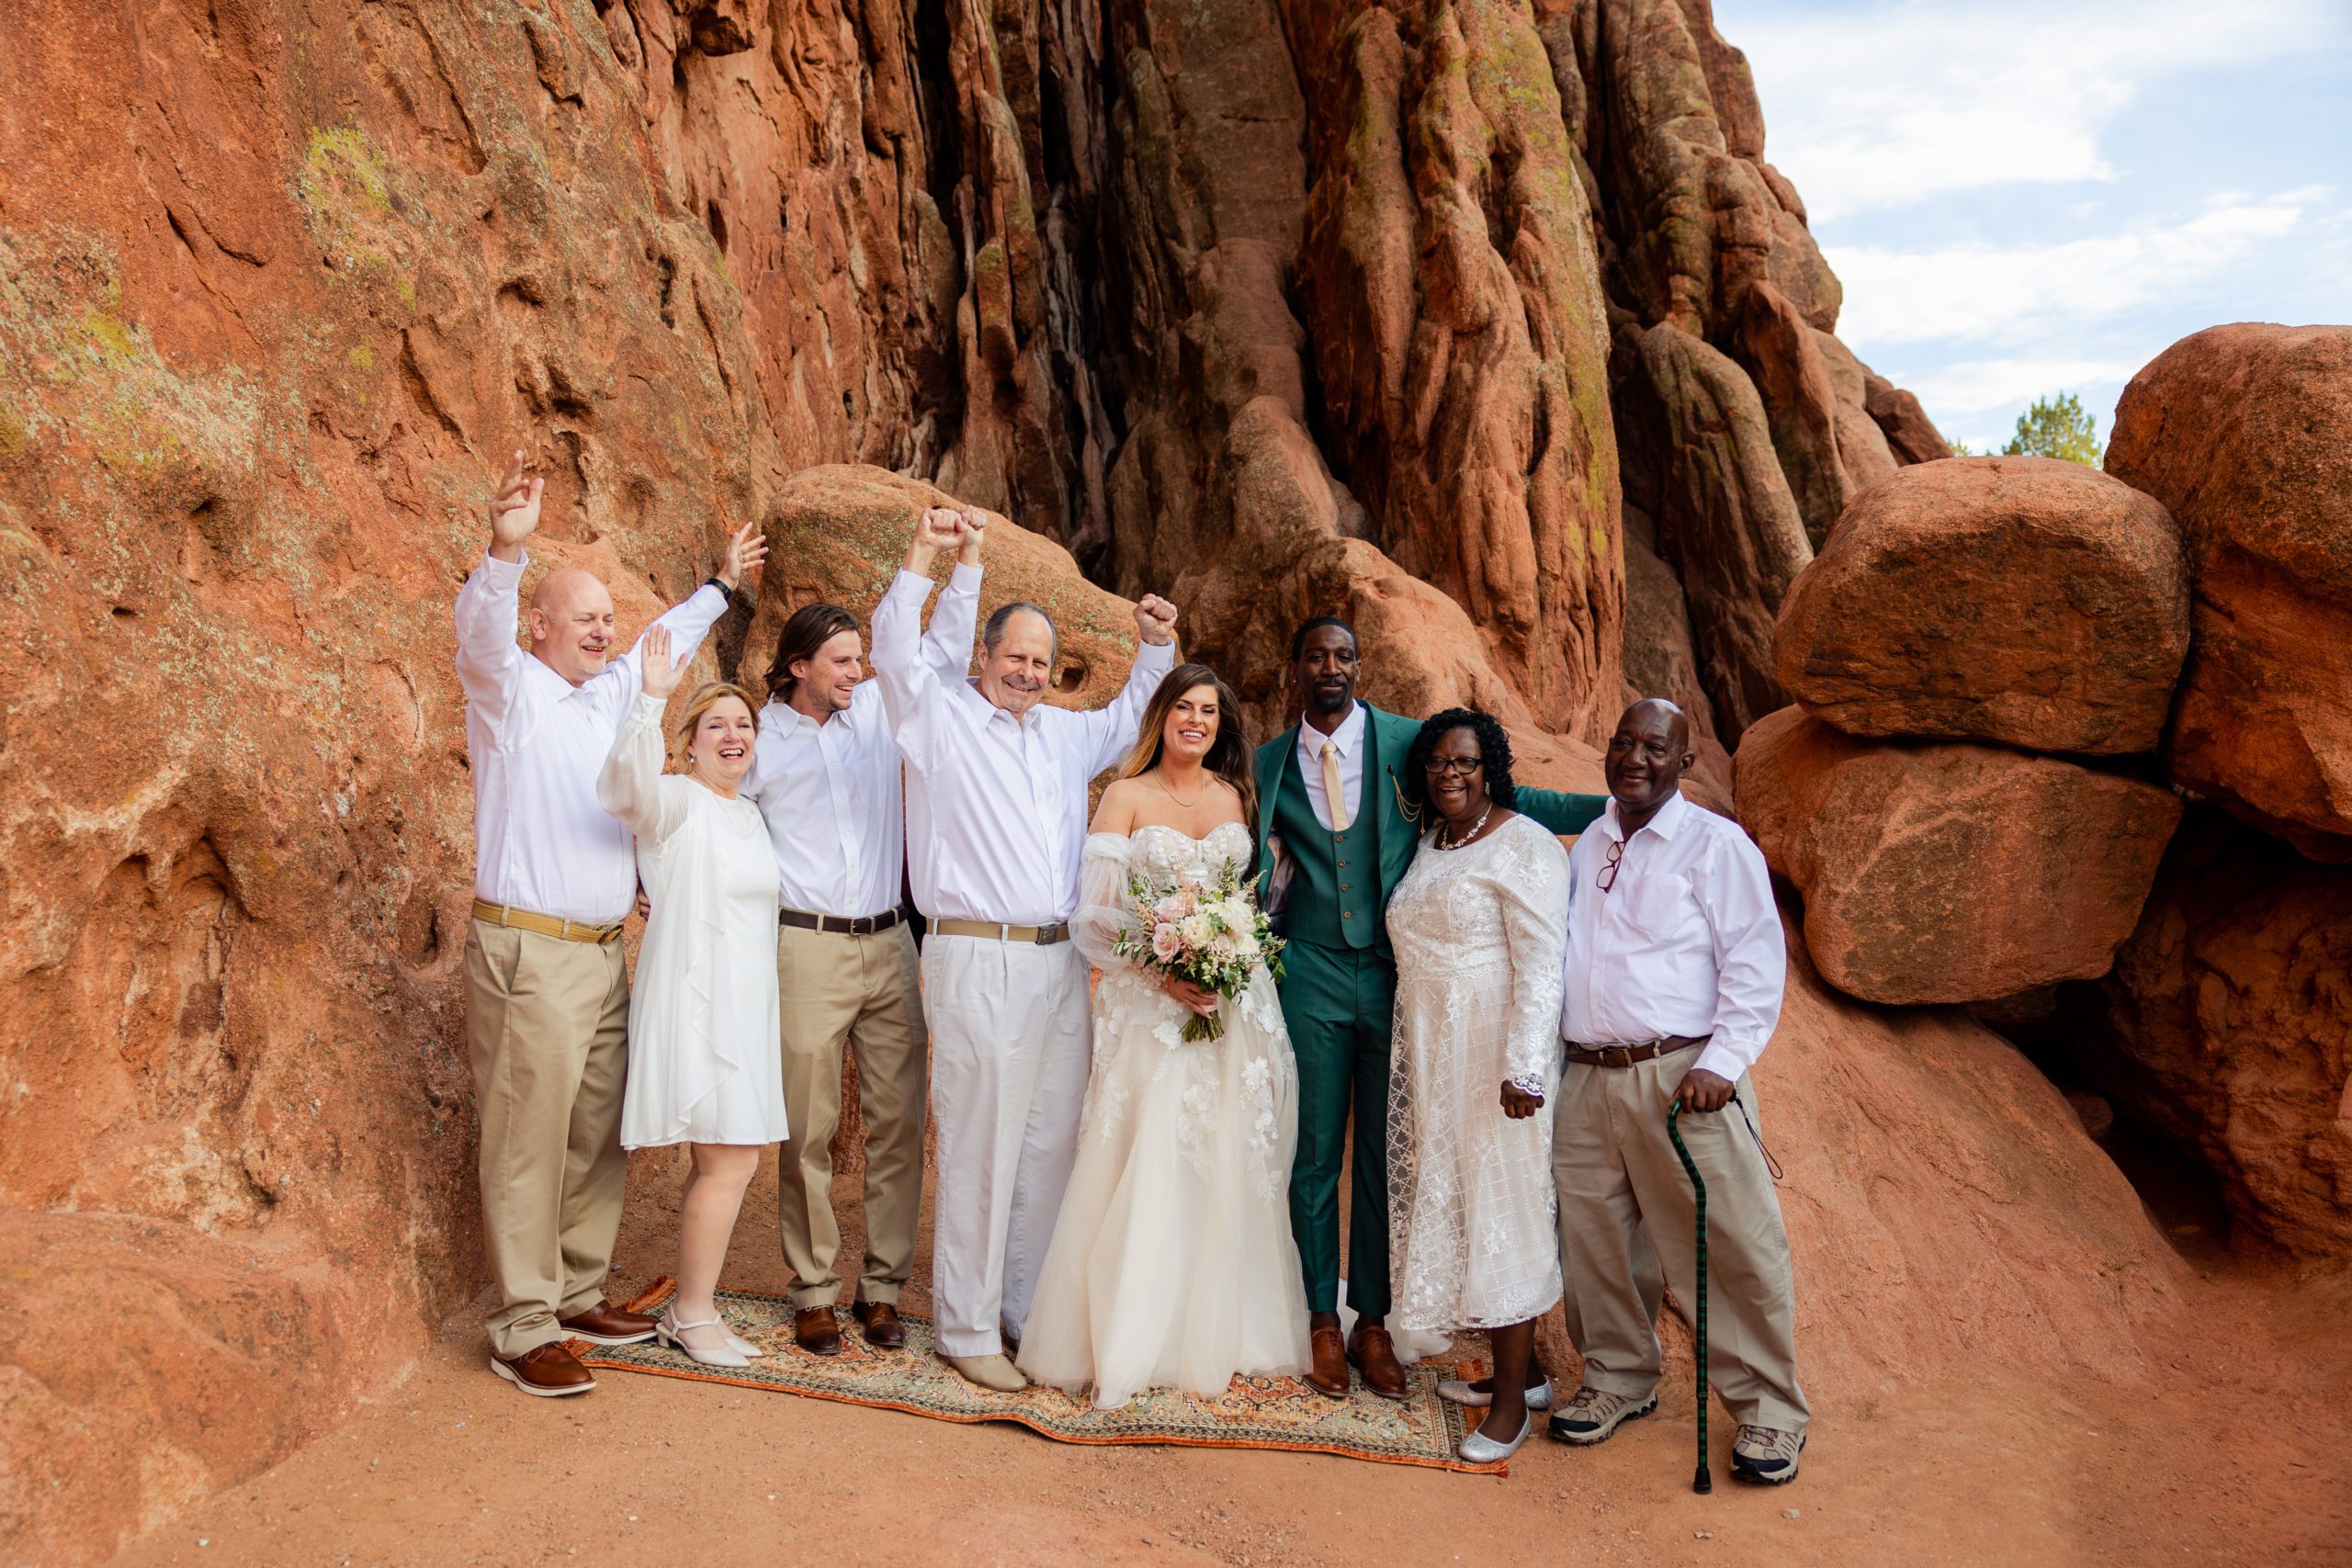 A family photo after their ceremony at  at the Garden of the Gods.